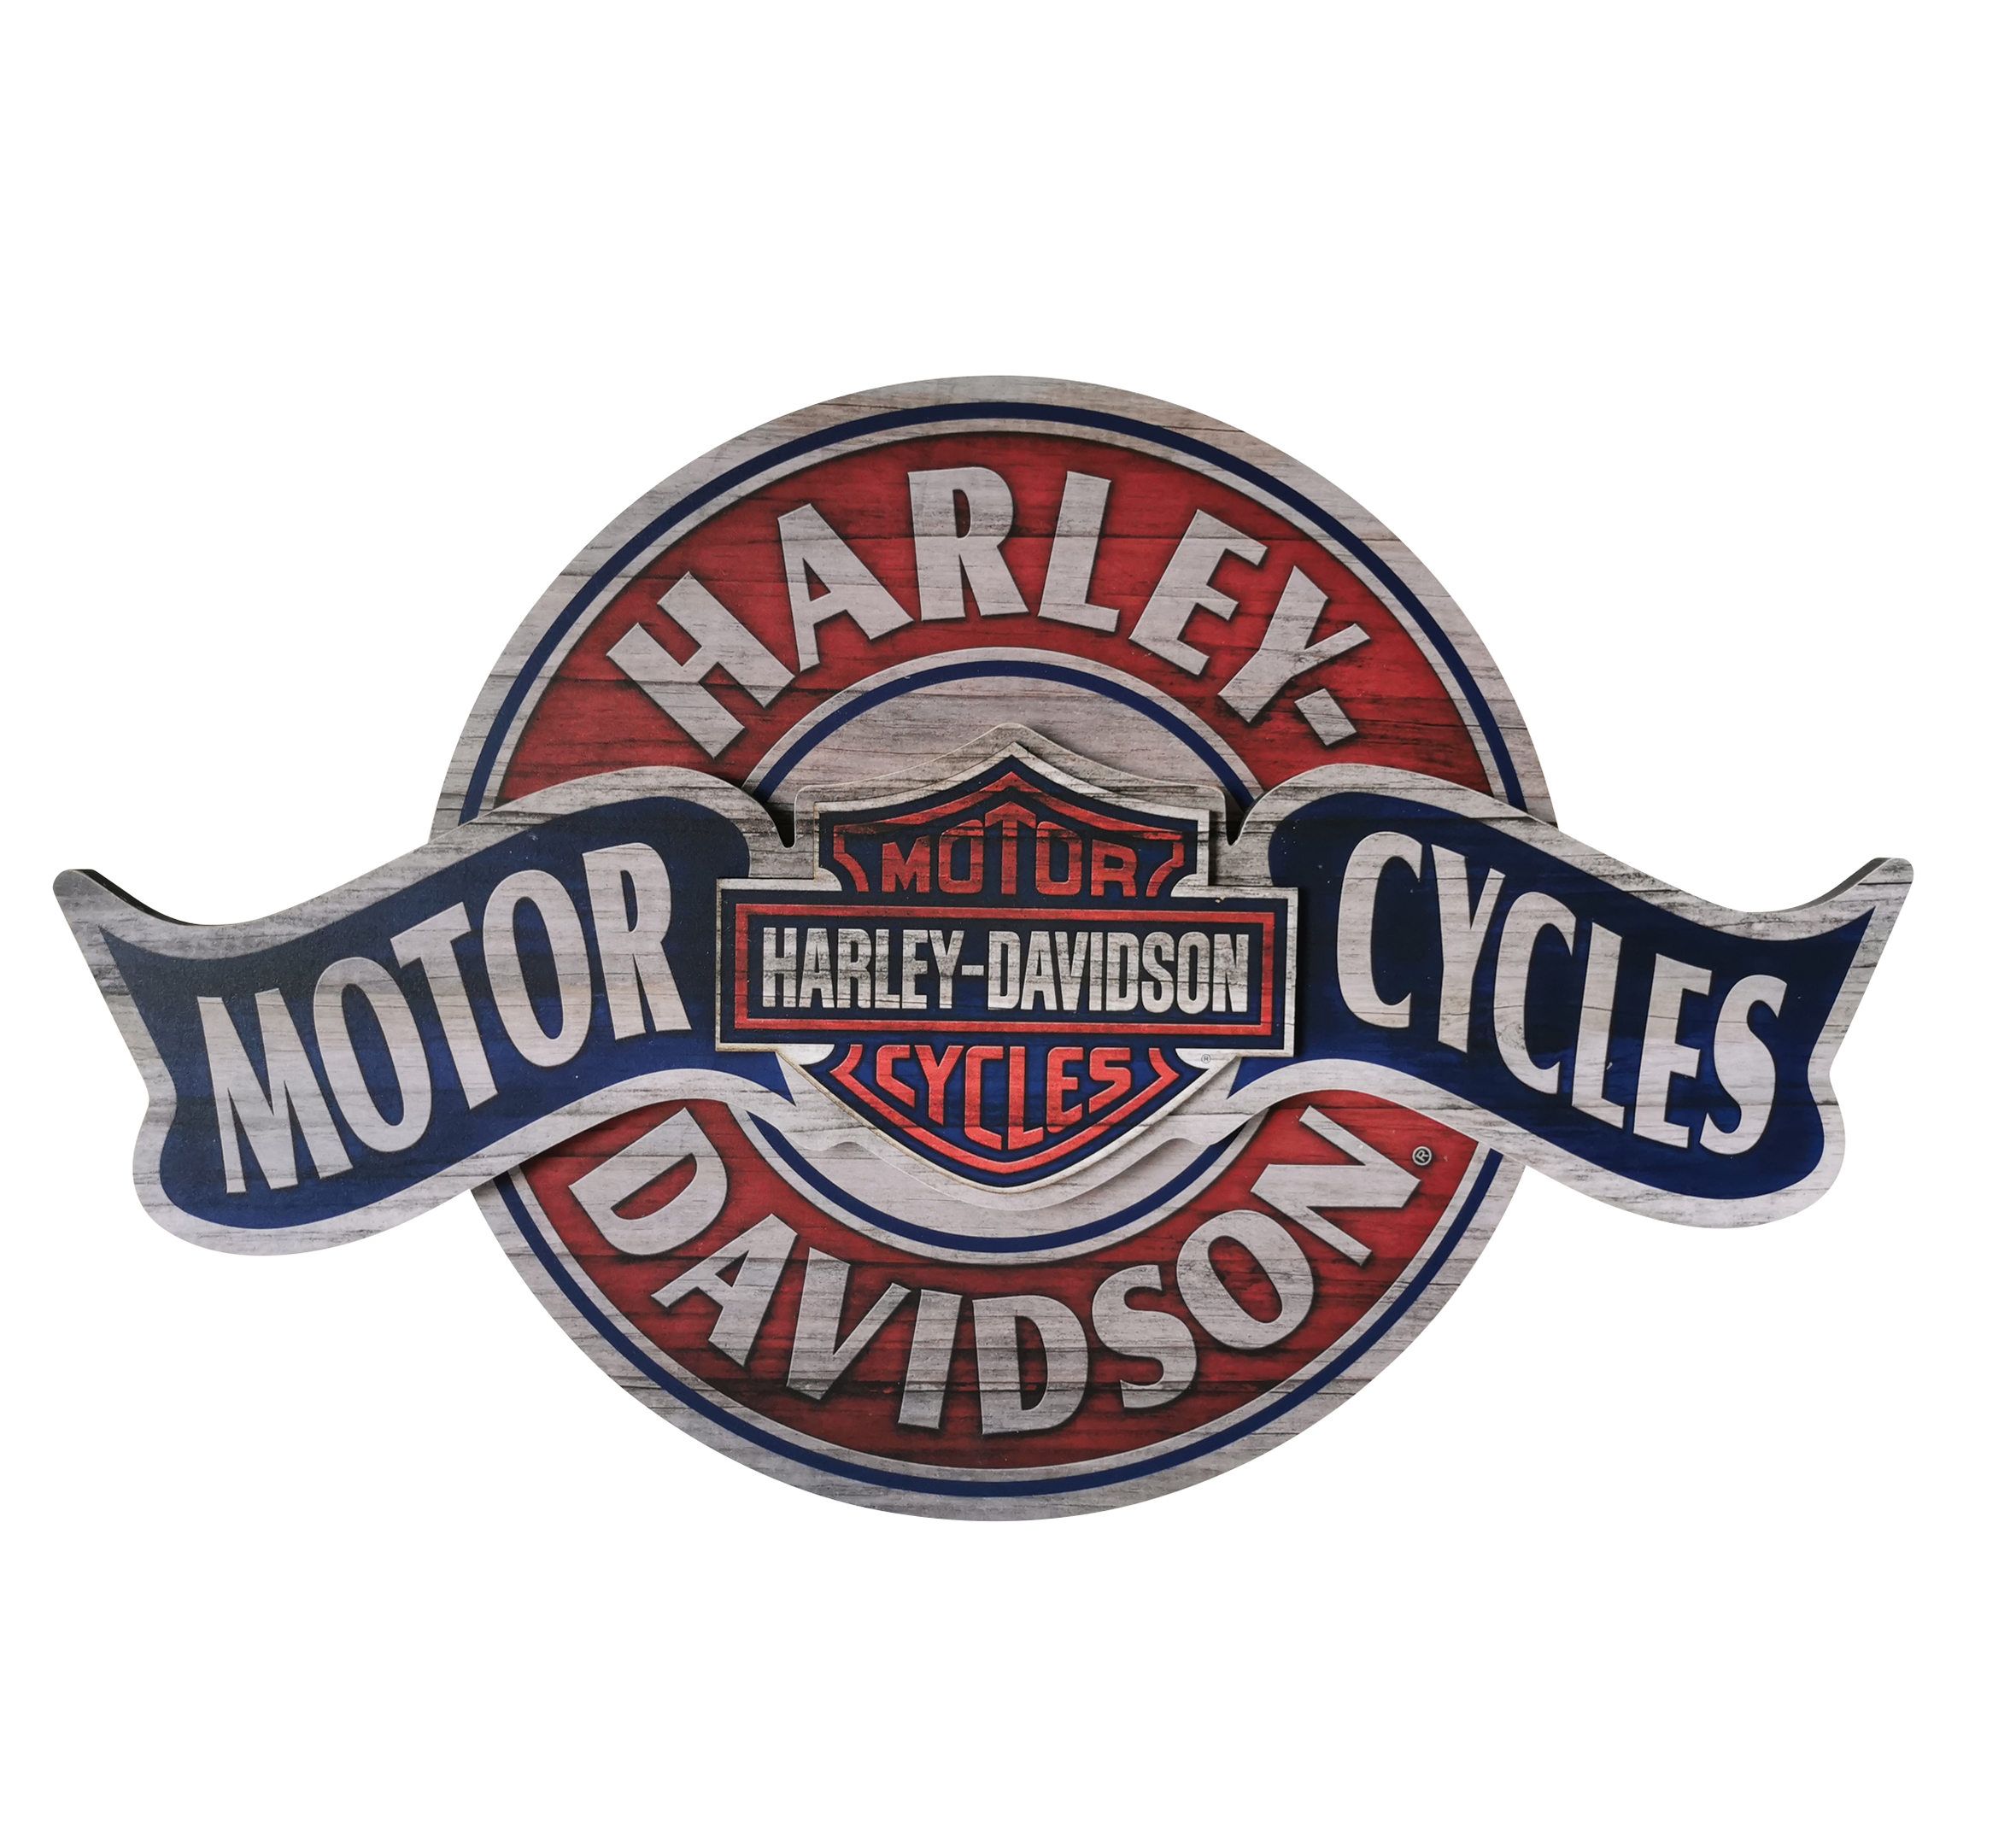 Harley Davidson Bike Motocycles Collectibles Iron on patches  9 x 10 cm